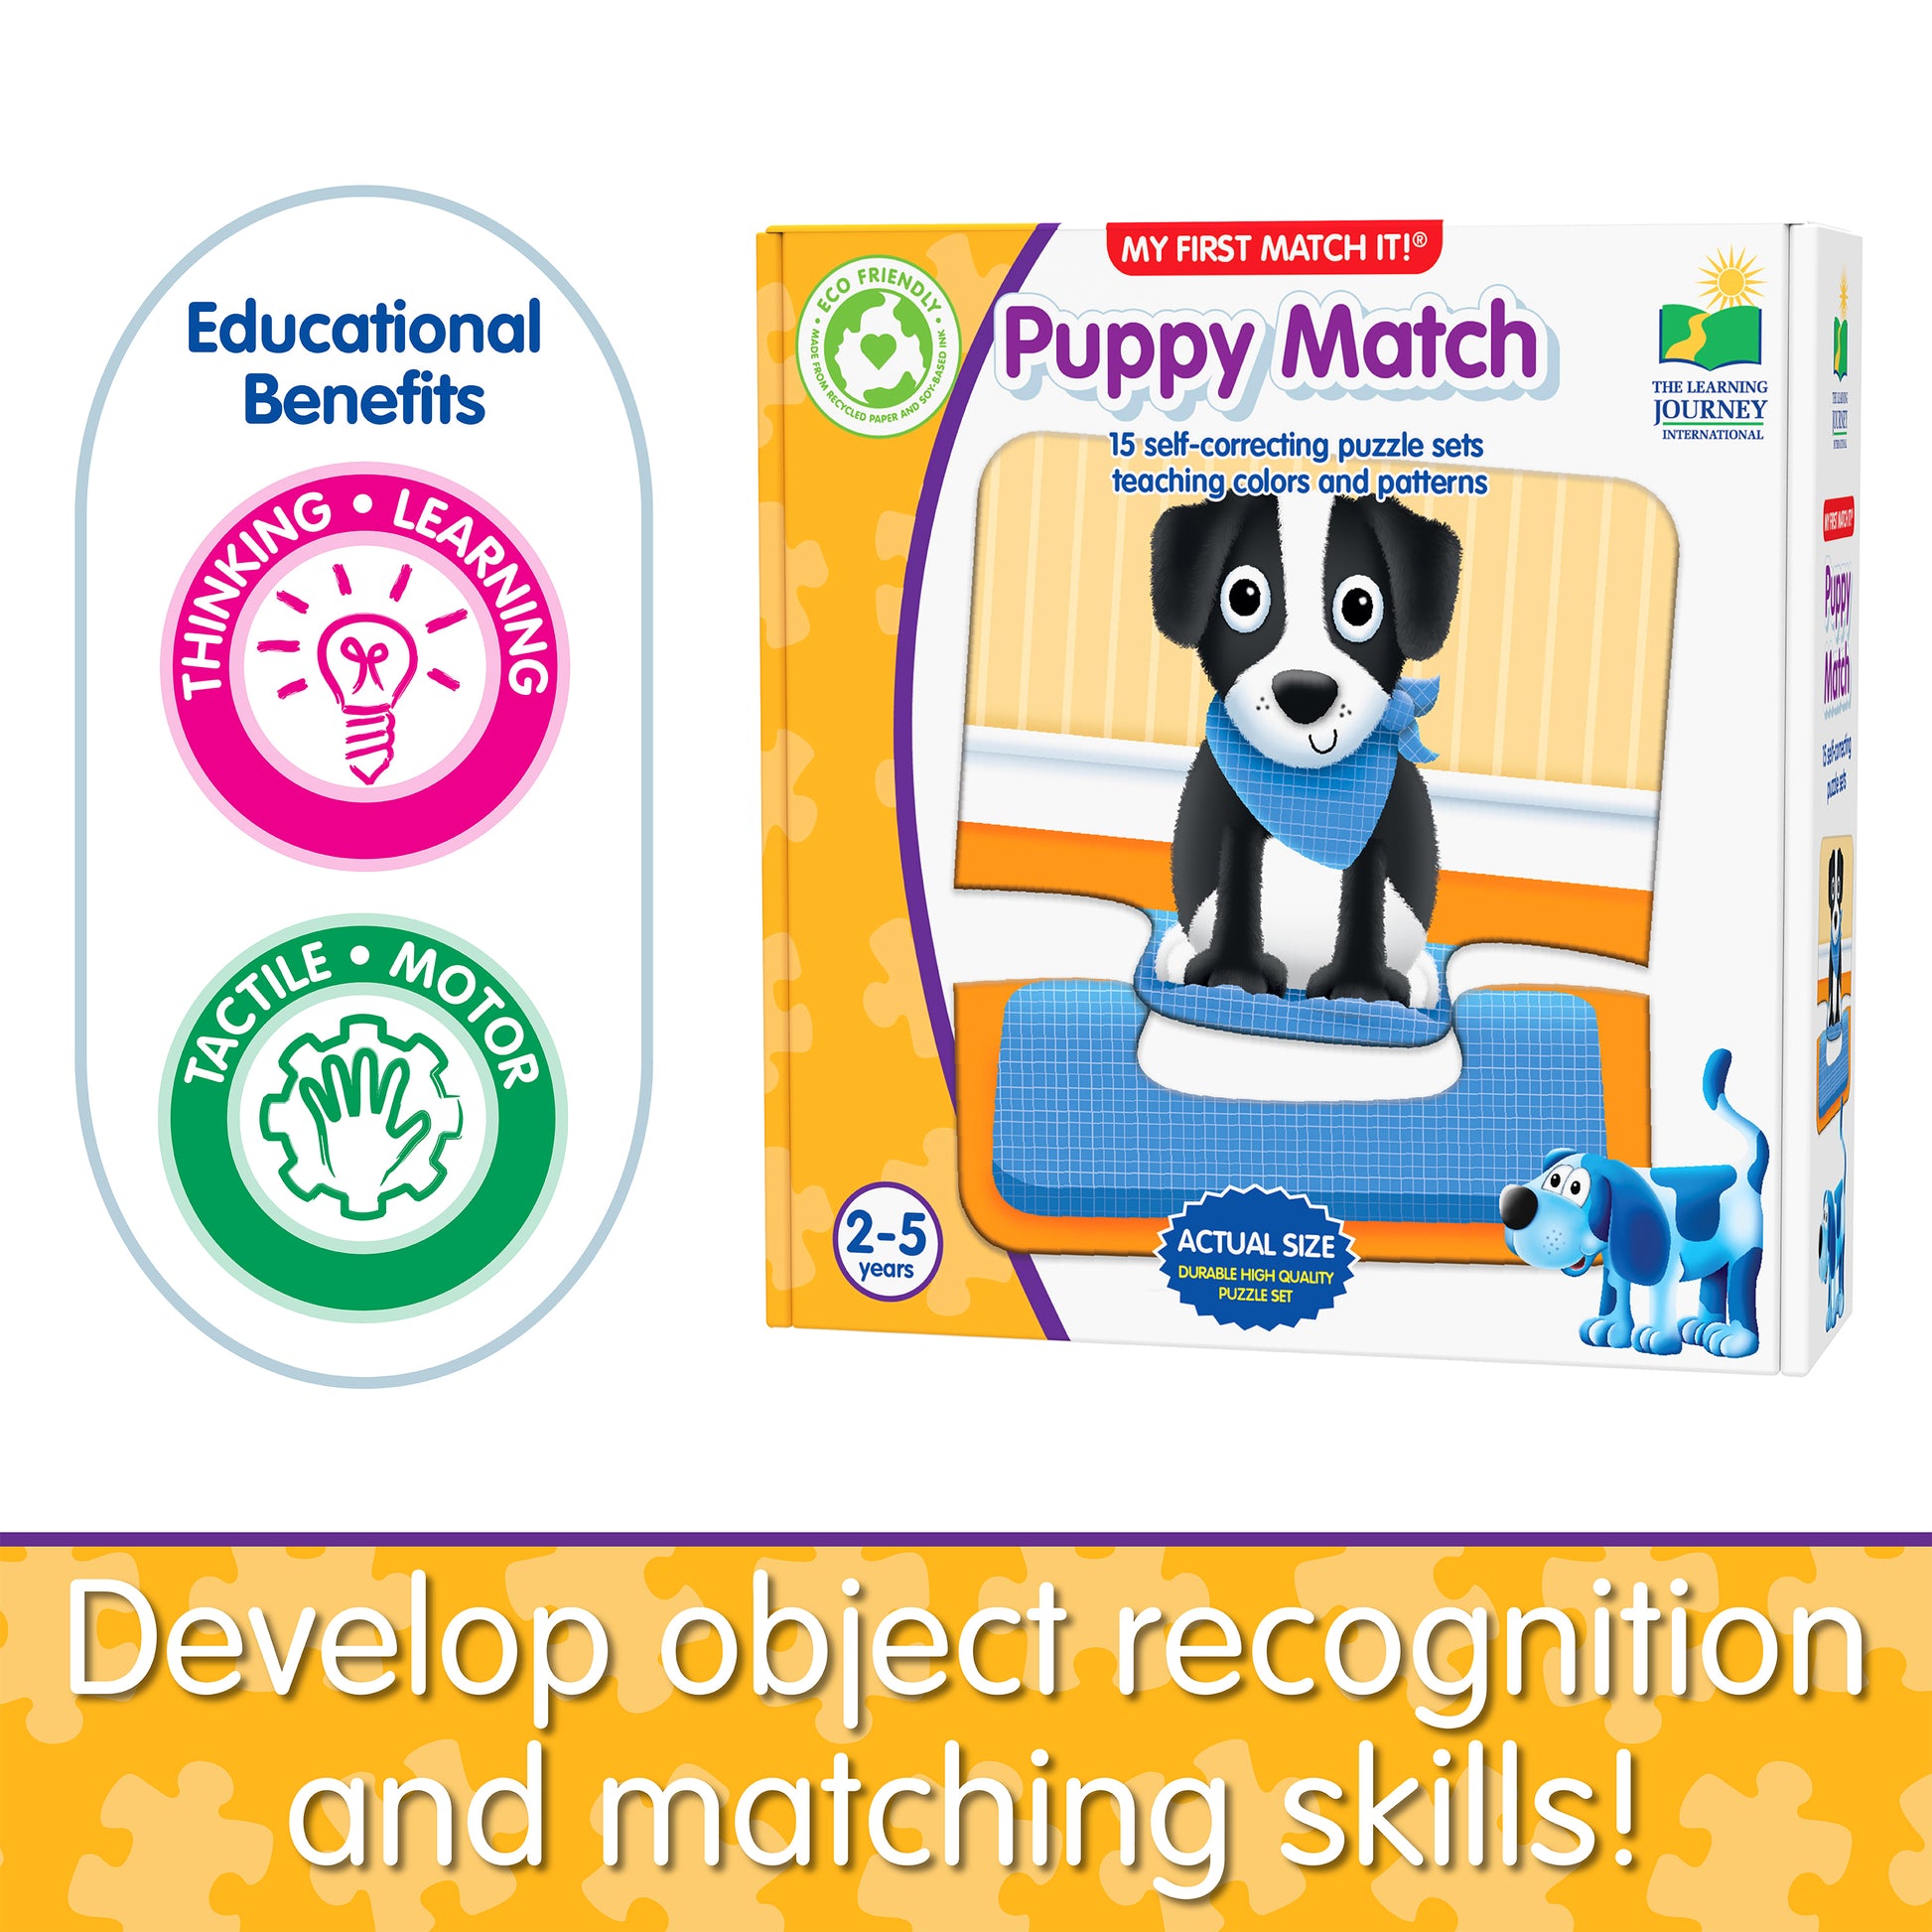 Infographic about Puppy Match's educational benefits